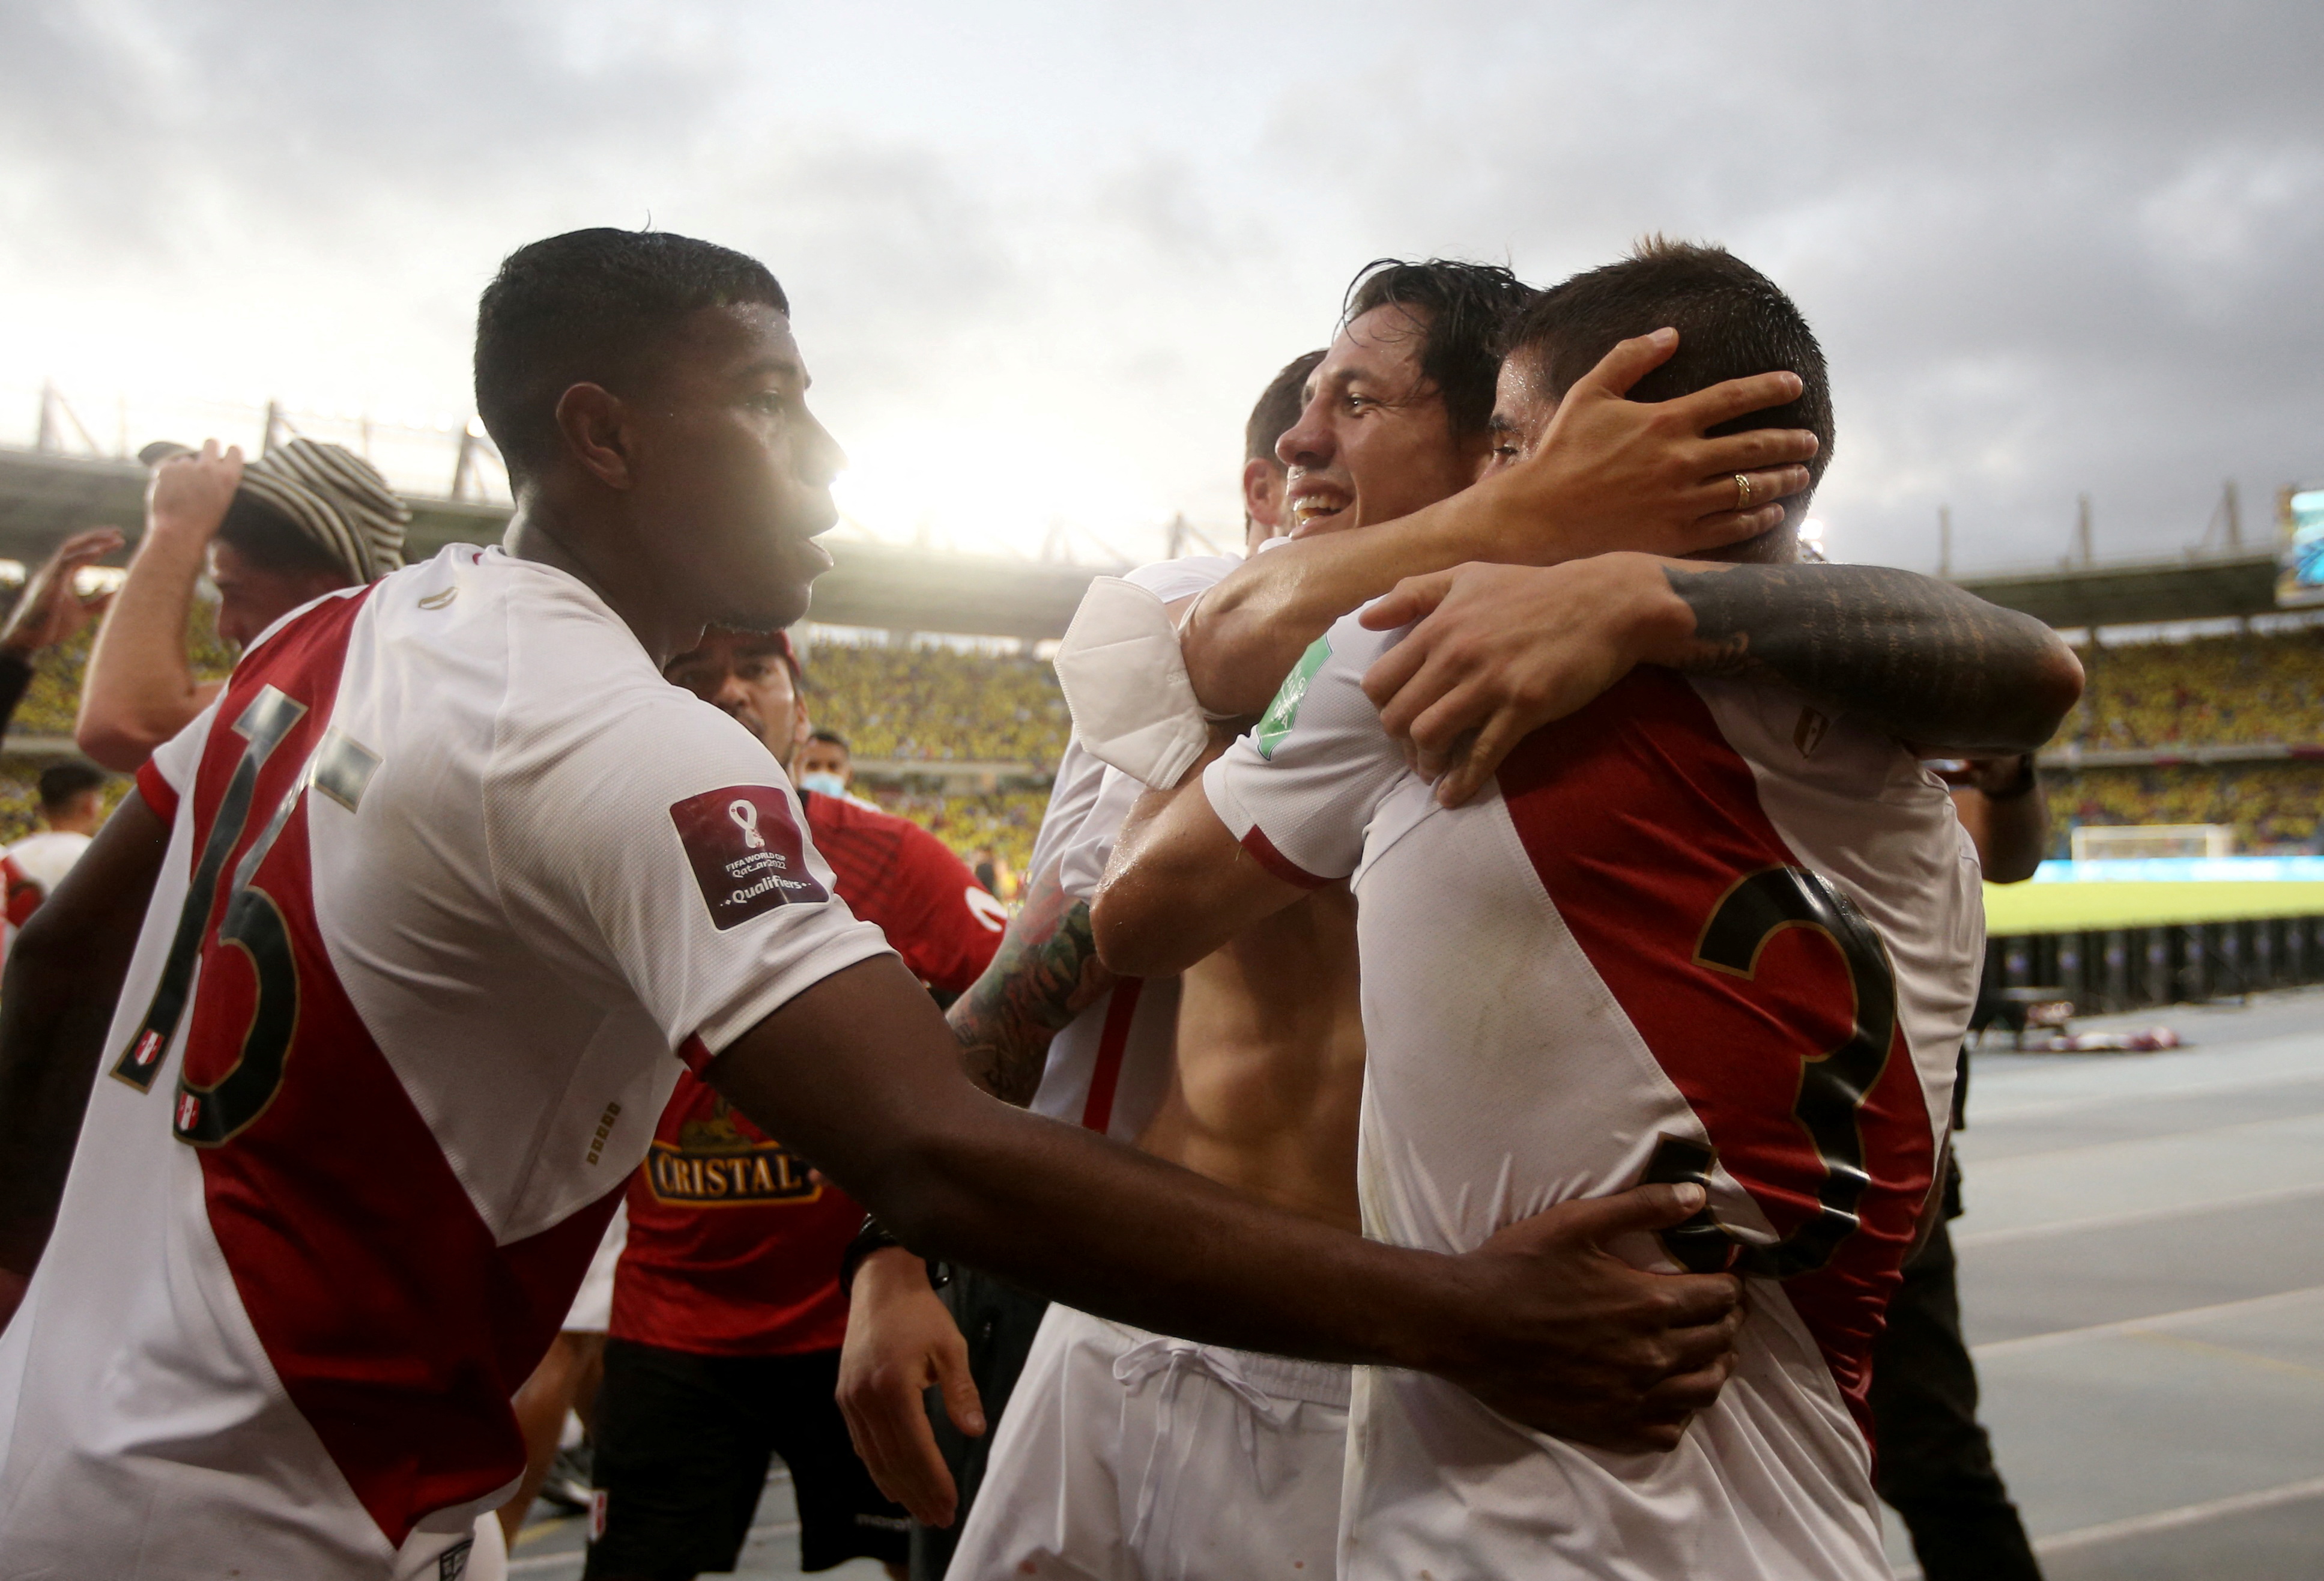 Soccer Football - World Cup - South American Qualifiers - Colombia v Peru - Estadio Metropolitano Roberto Melendez, Barranquilla, Colombia - January 28, 2022 Peru players celebrate after the match REUTERS/Luisa Gonzalez